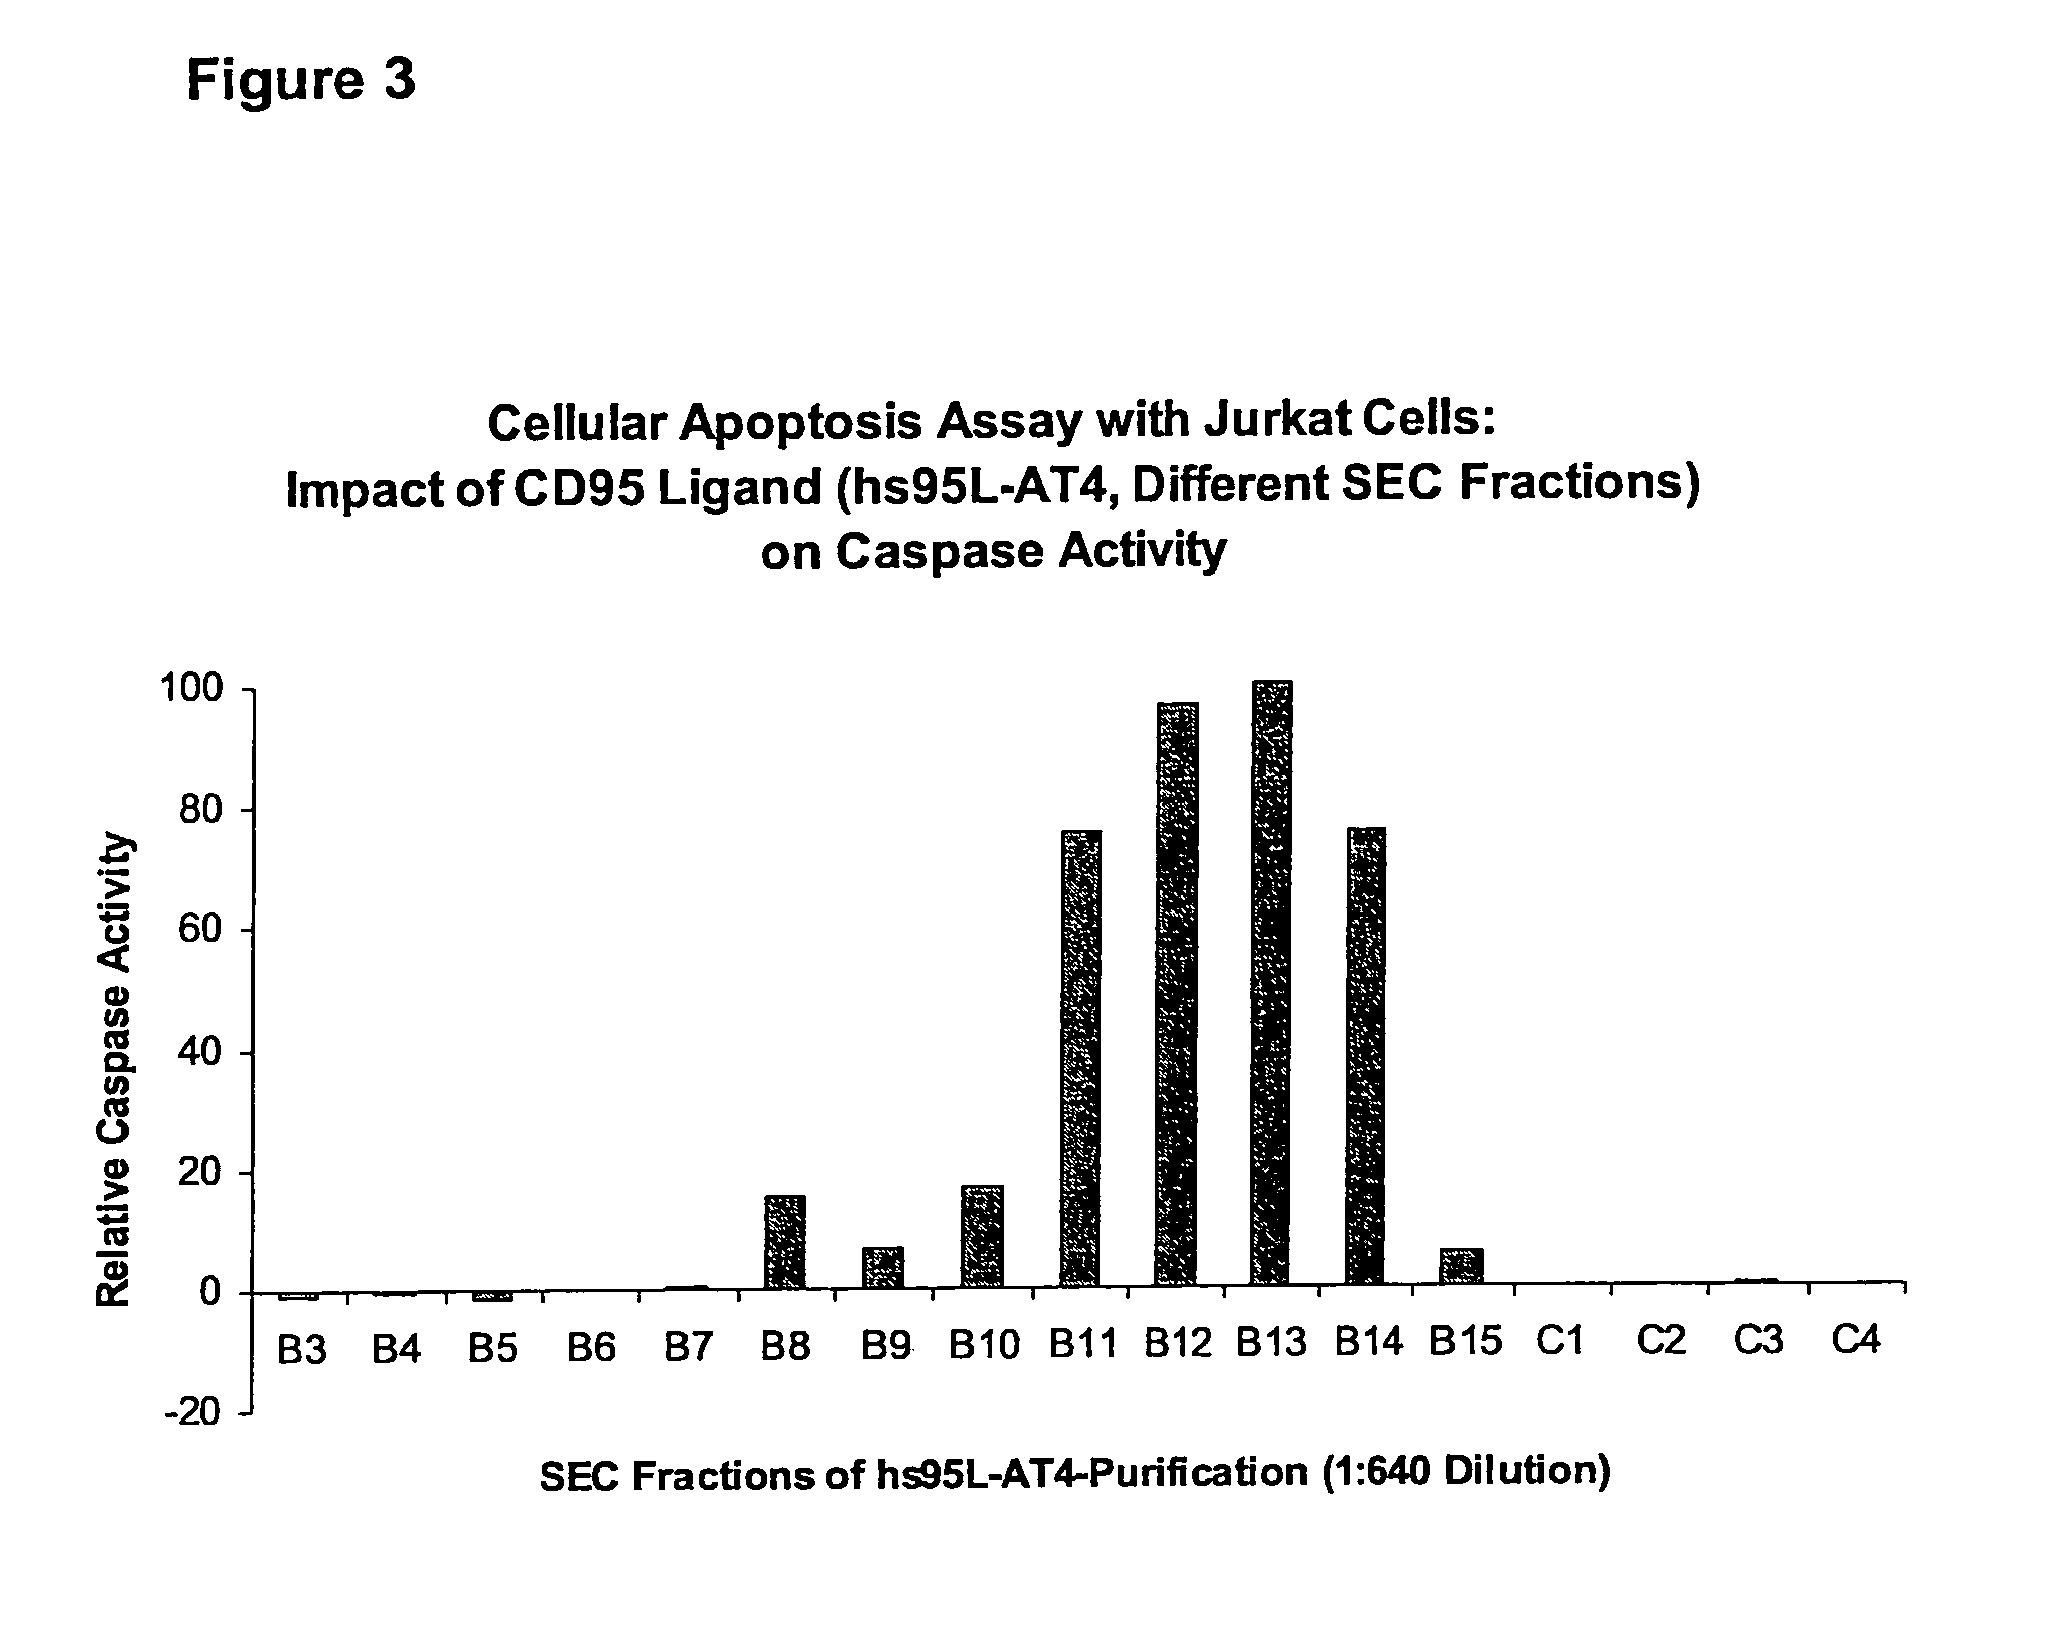 CD95L or trail fusion proteins